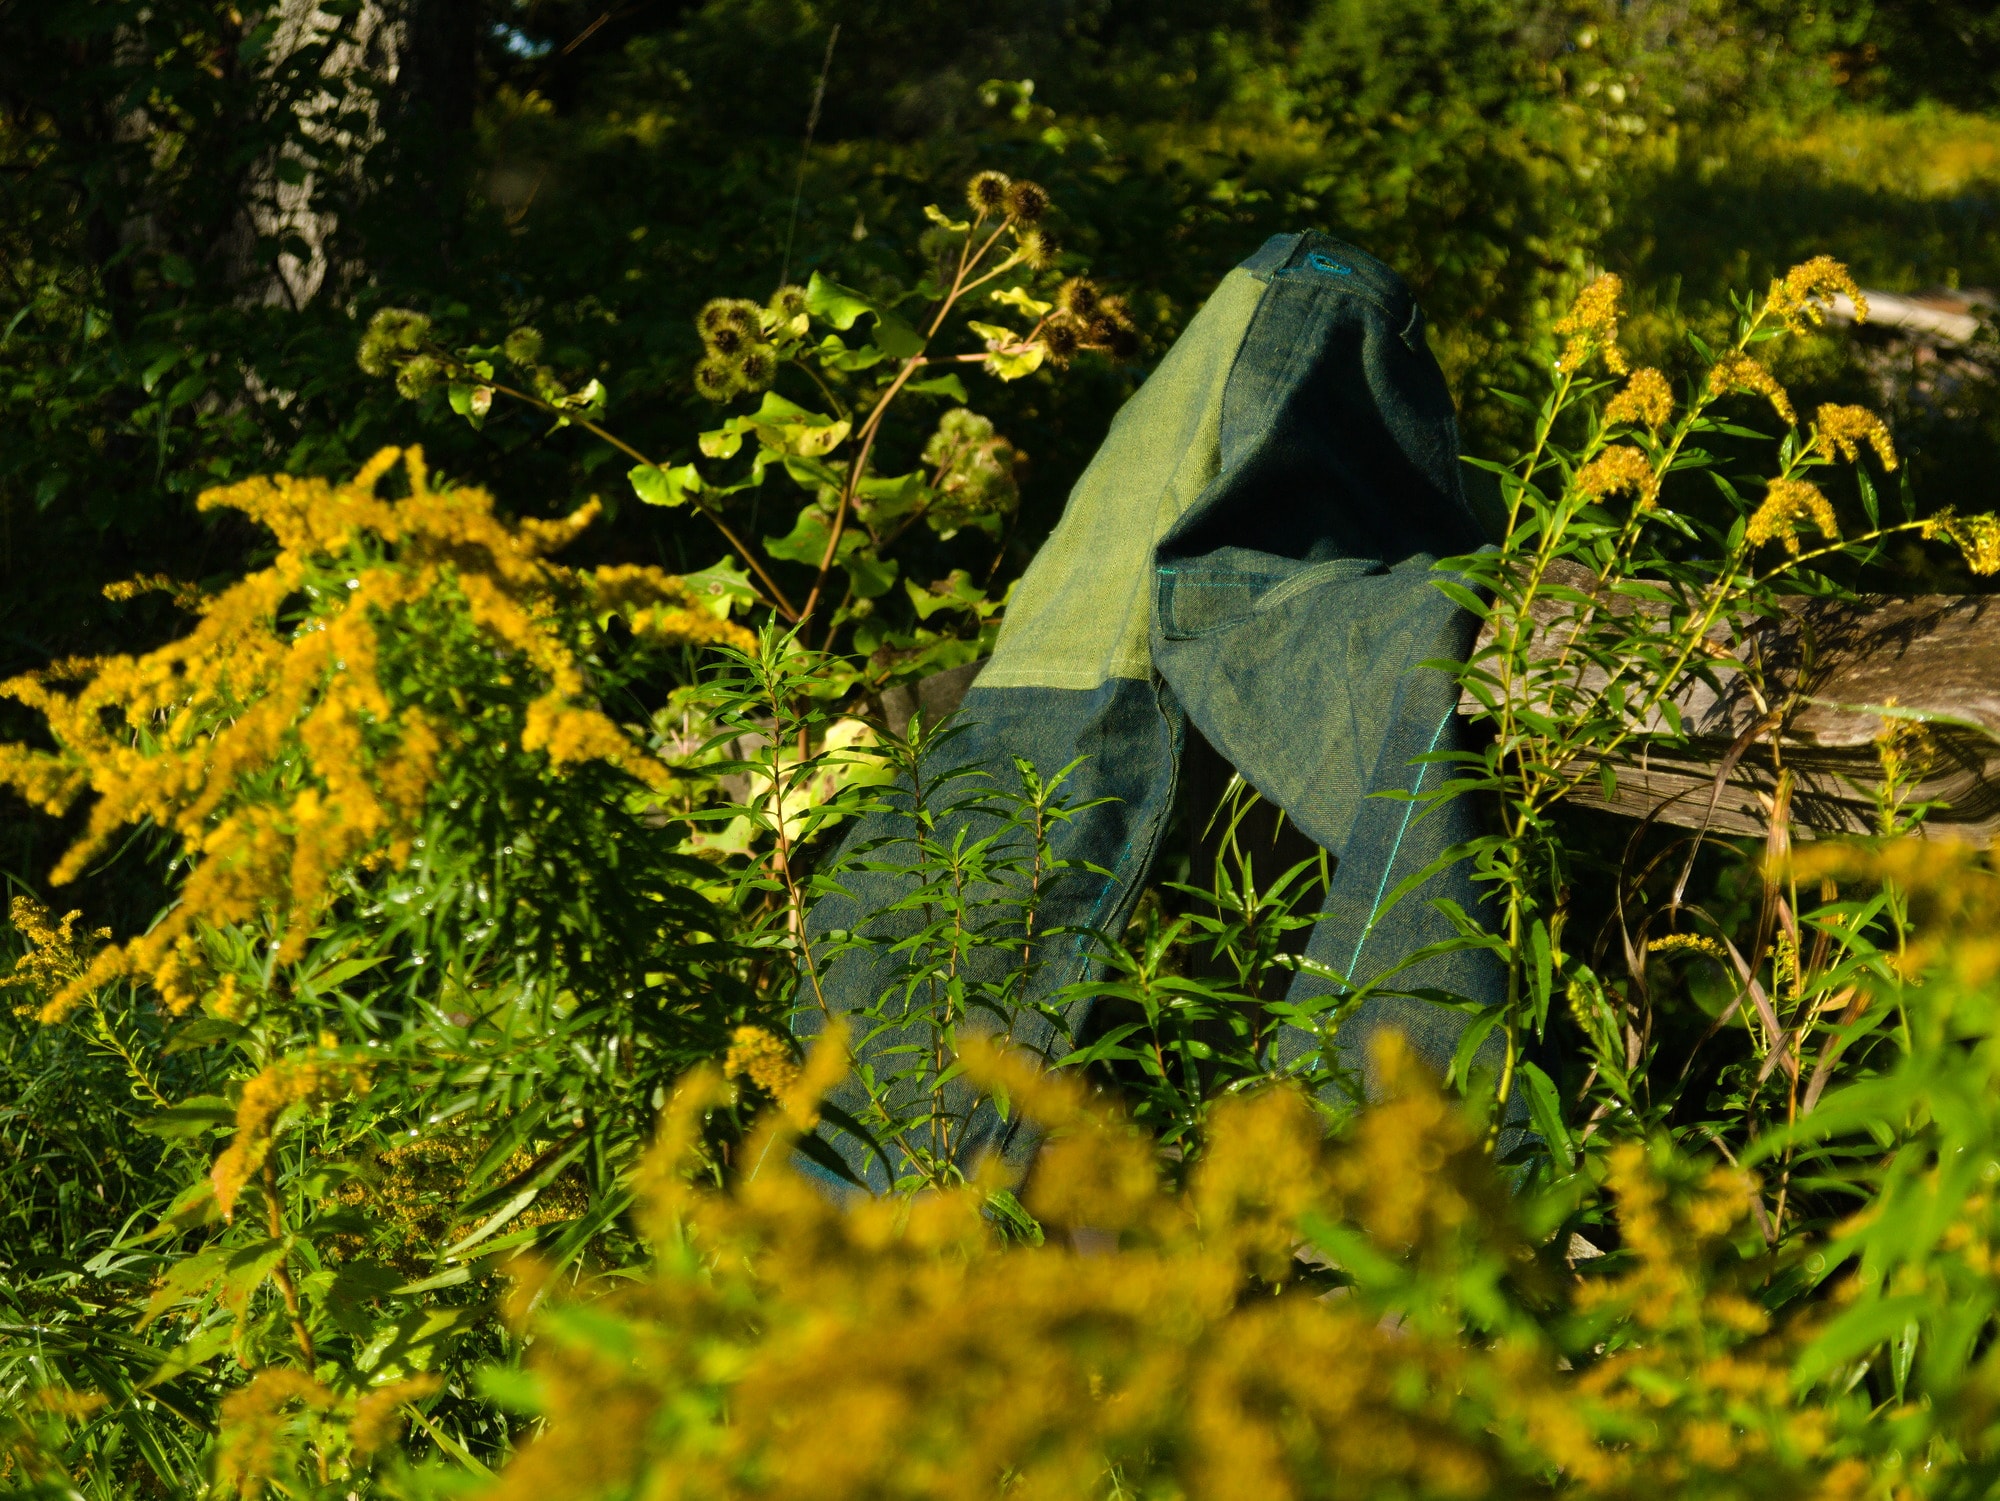 horizontal sunlight on a field of goldenrod. in the middle is a pair of pants draped over a wooden fence.